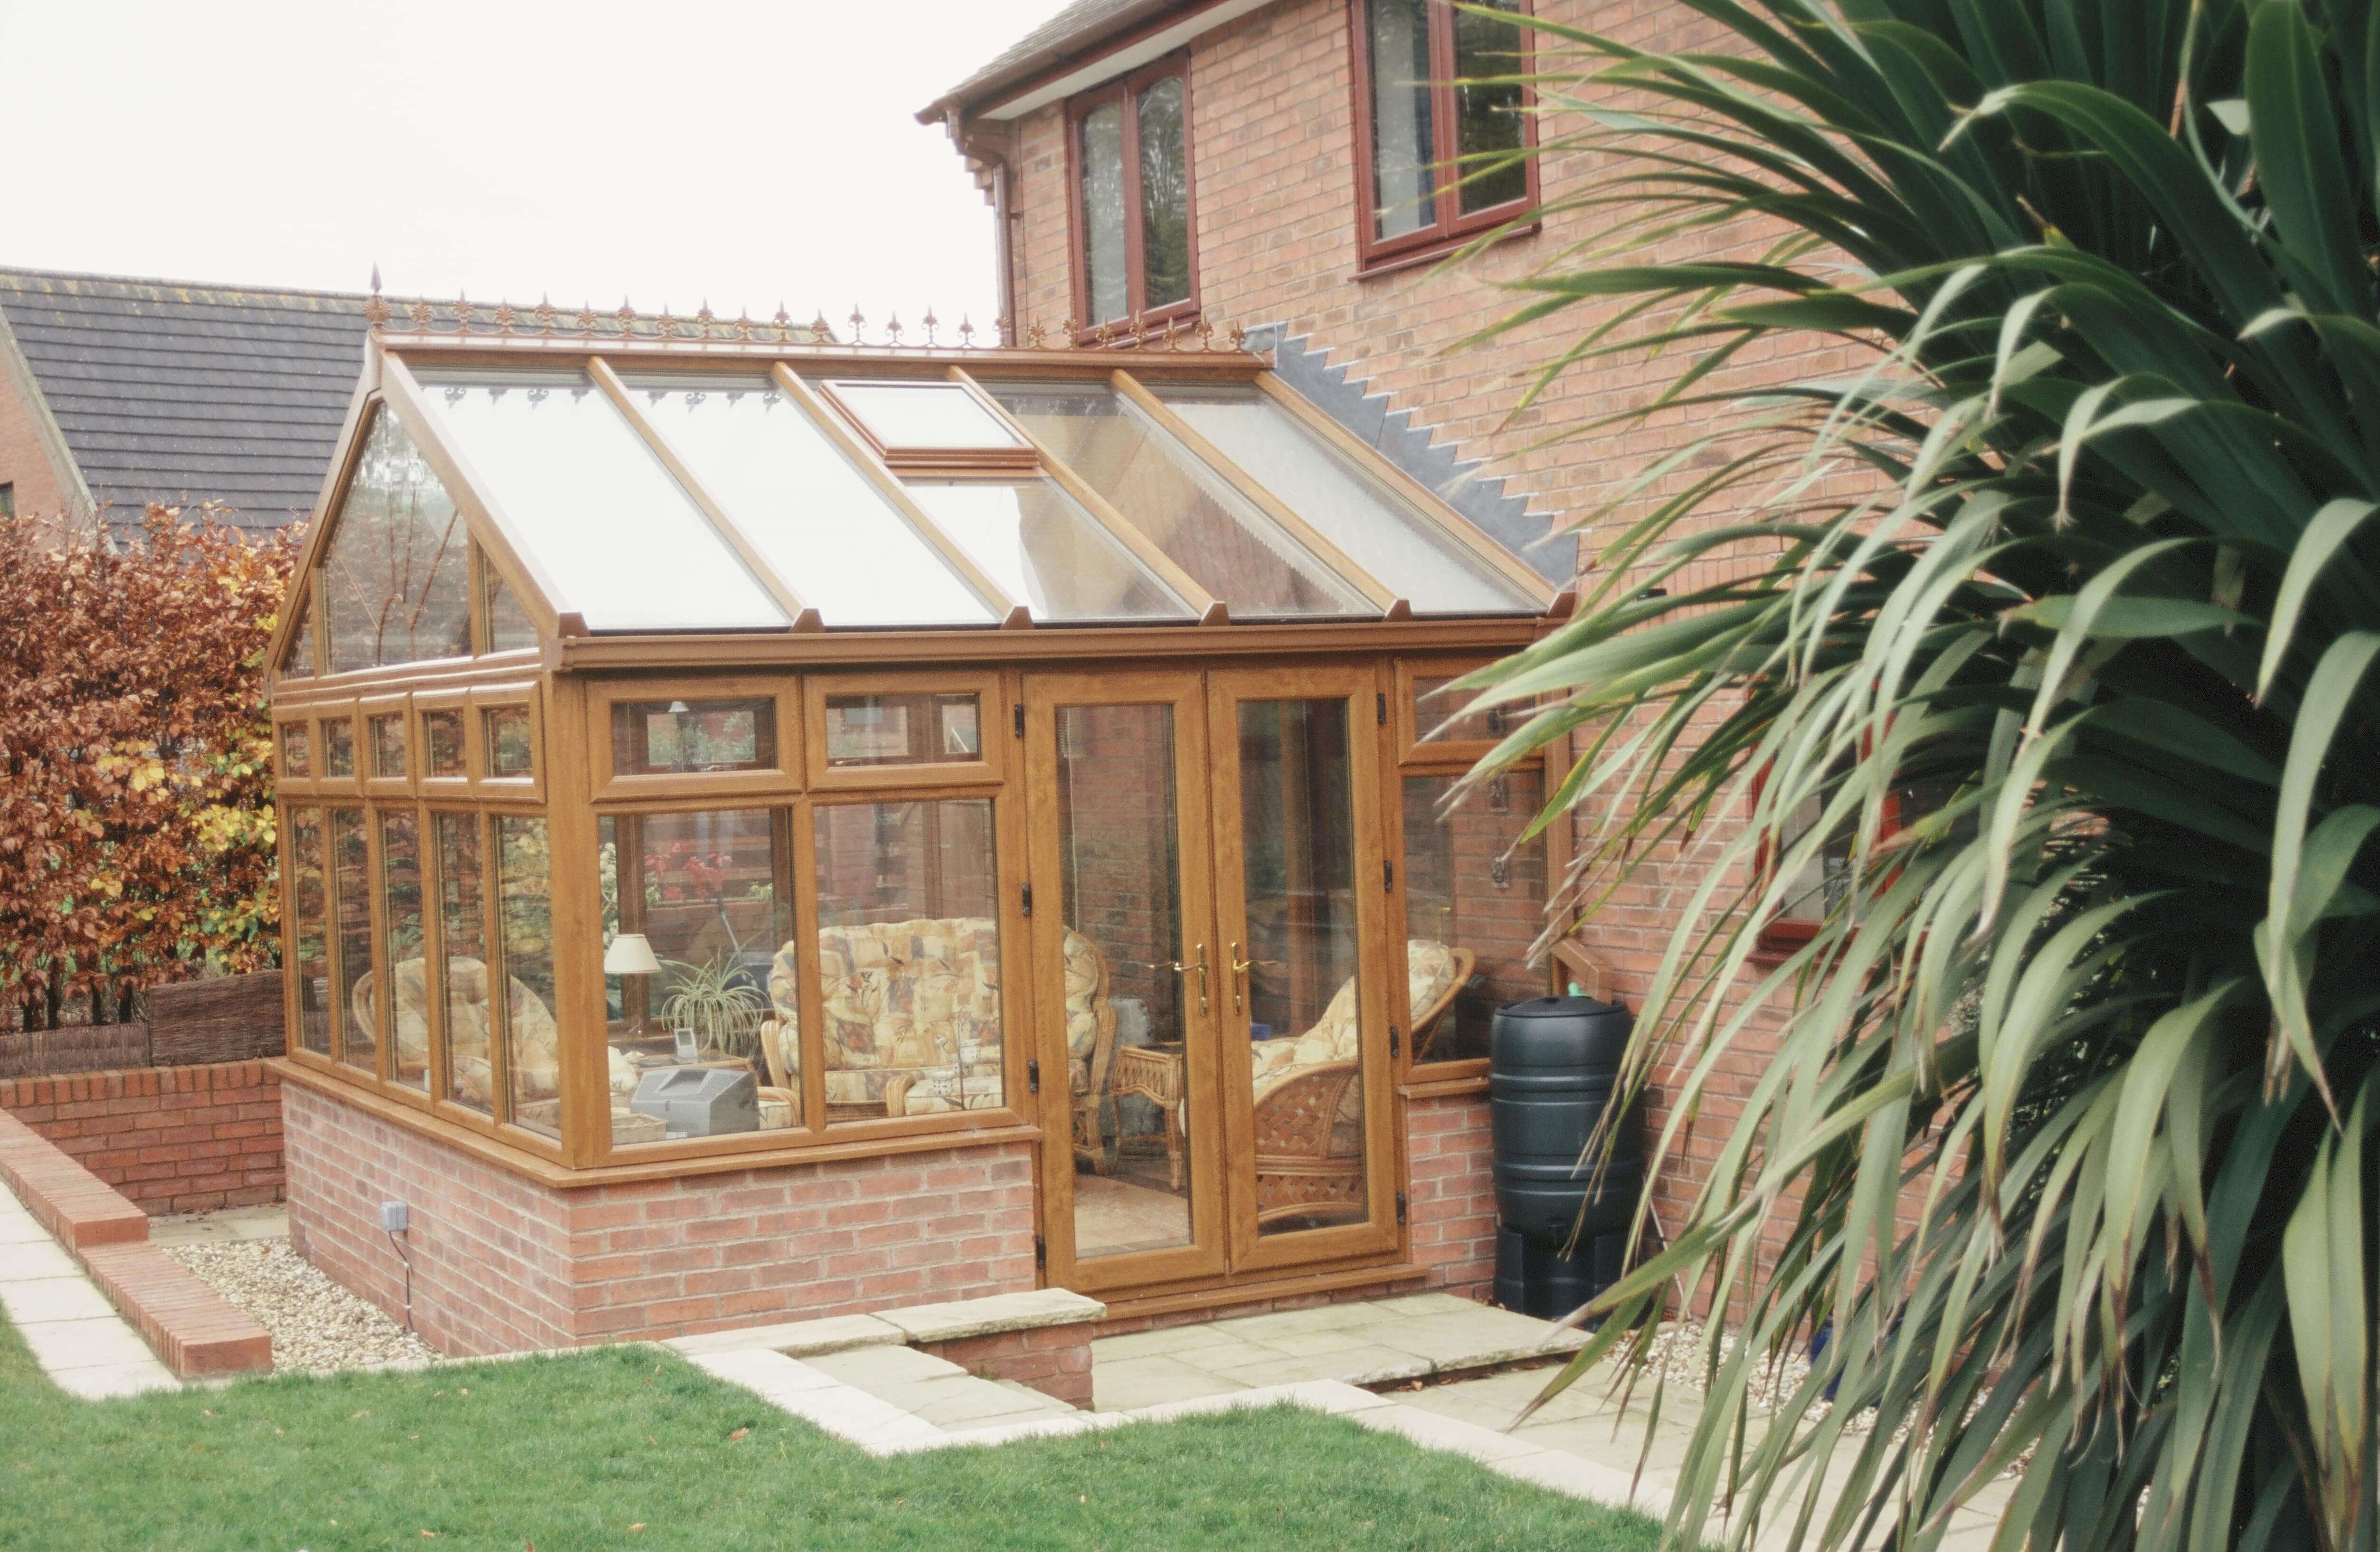 Gable End Conservatory from outside